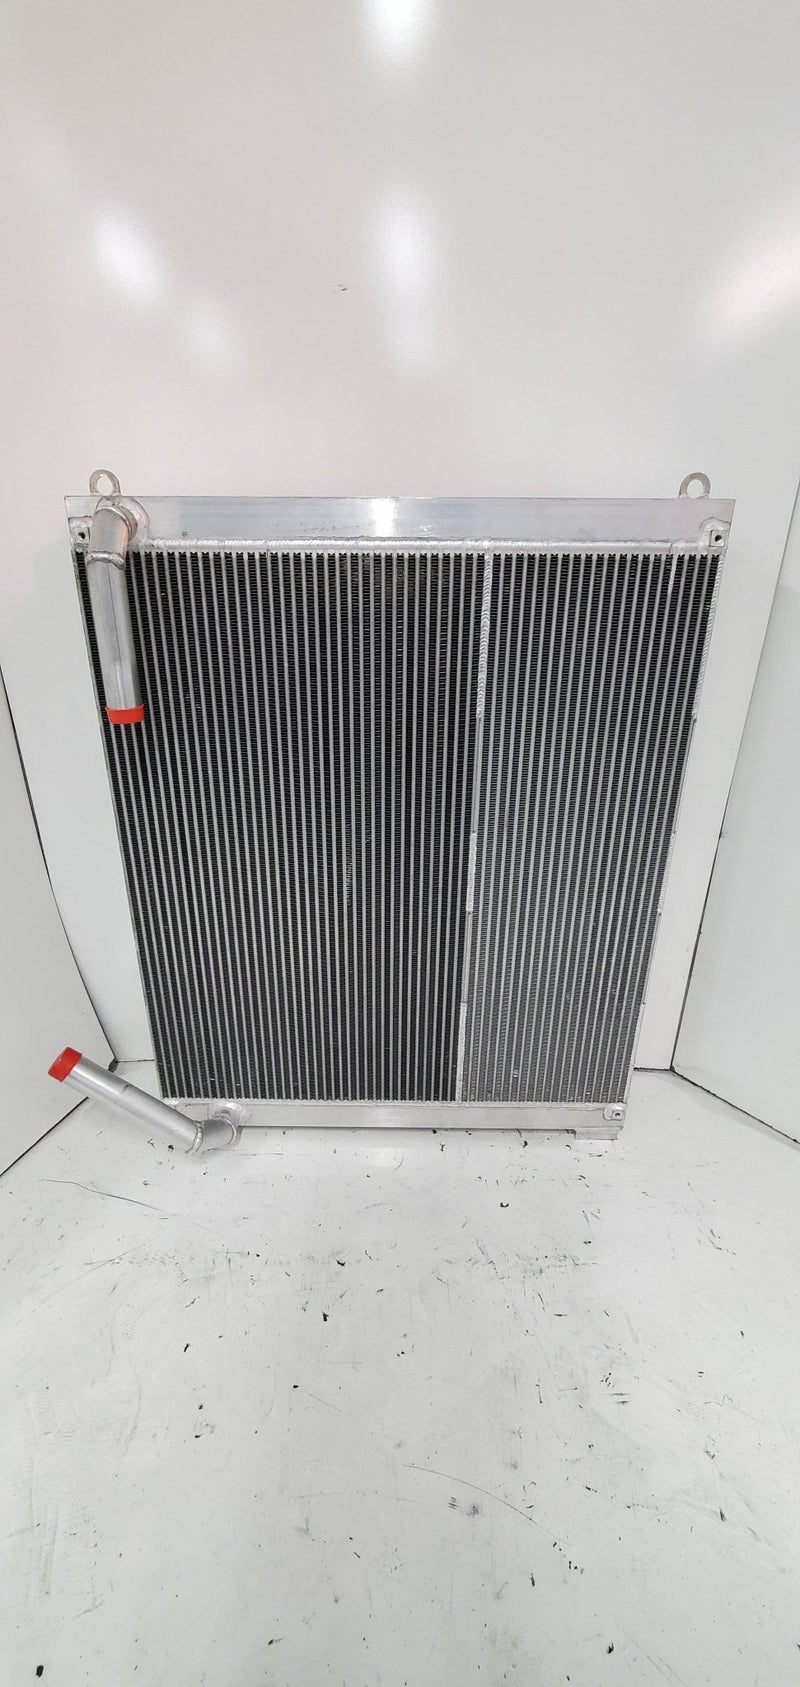 Load image into Gallery viewer, Hitachi 230-5, EX270-5 Oil Cooler # 870388 - Radiator Supply House
